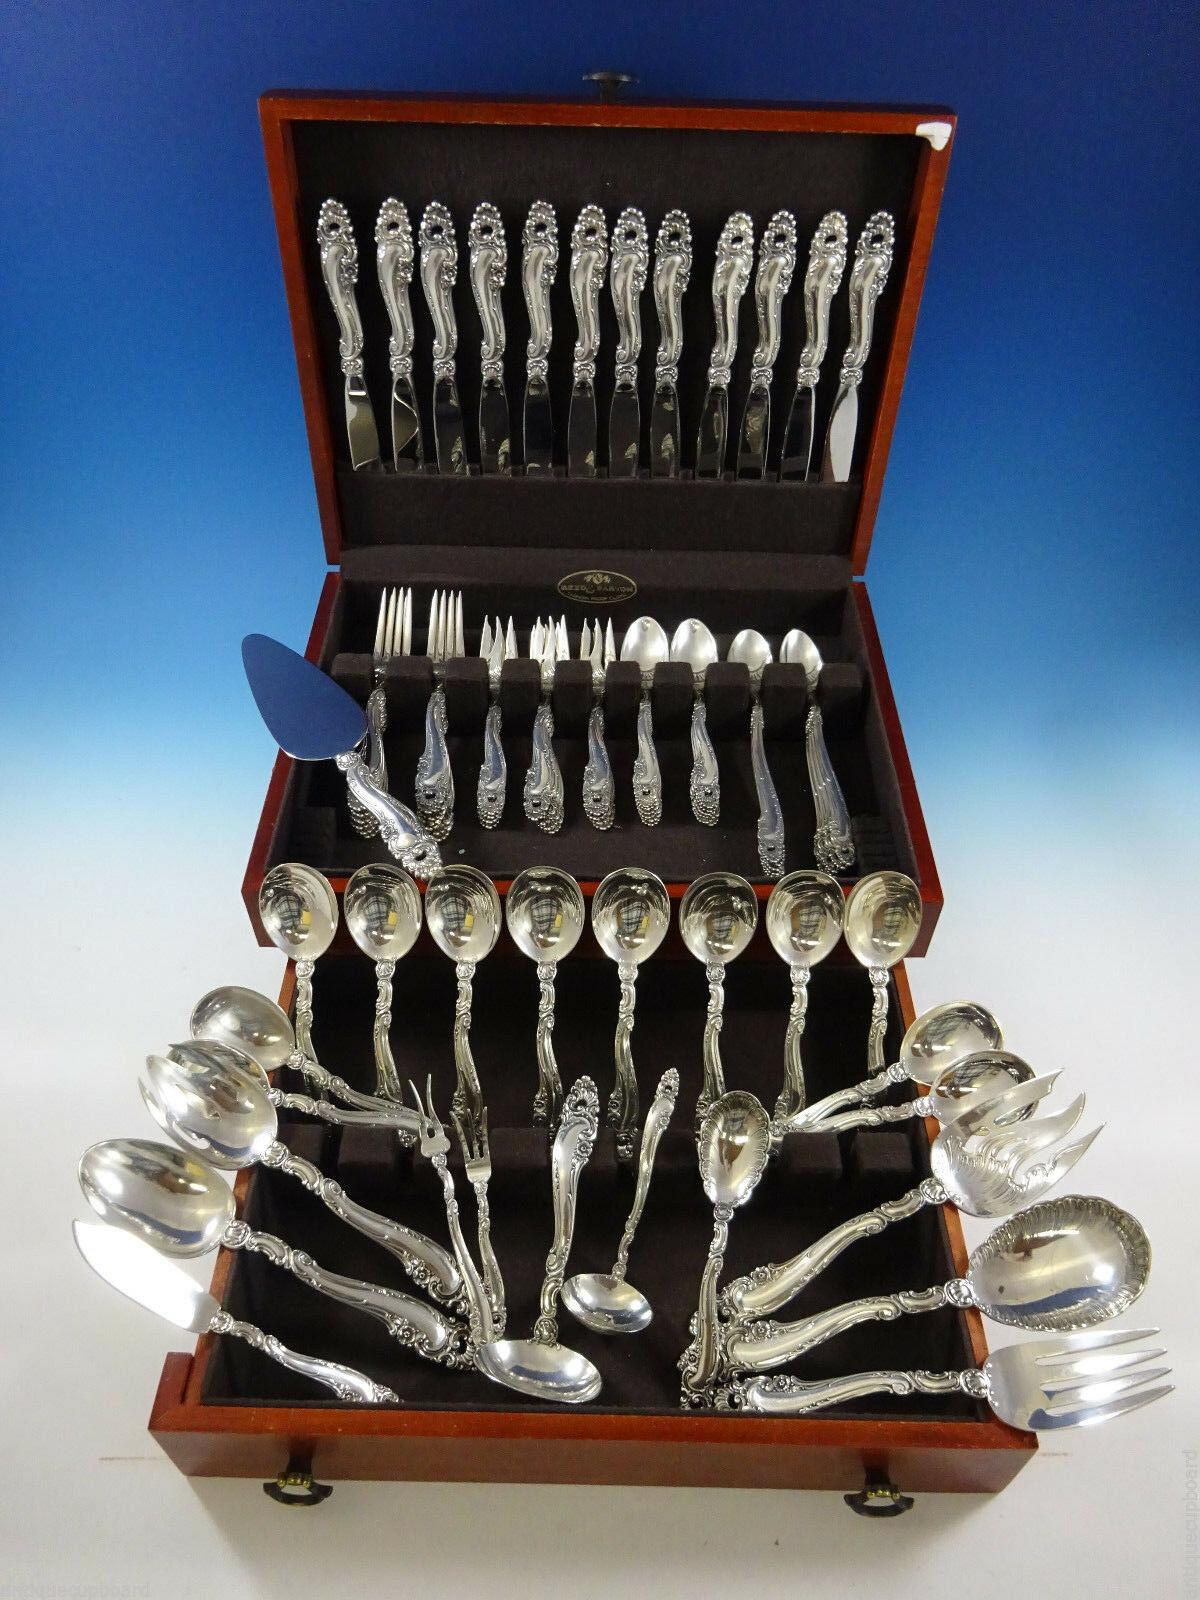 Decor by Gorham sterling silver flatware set - 84 Pieces. This pattern is heavy and features Rococo swirls, shells, and small flowers. This set includes:

12 knives, 9